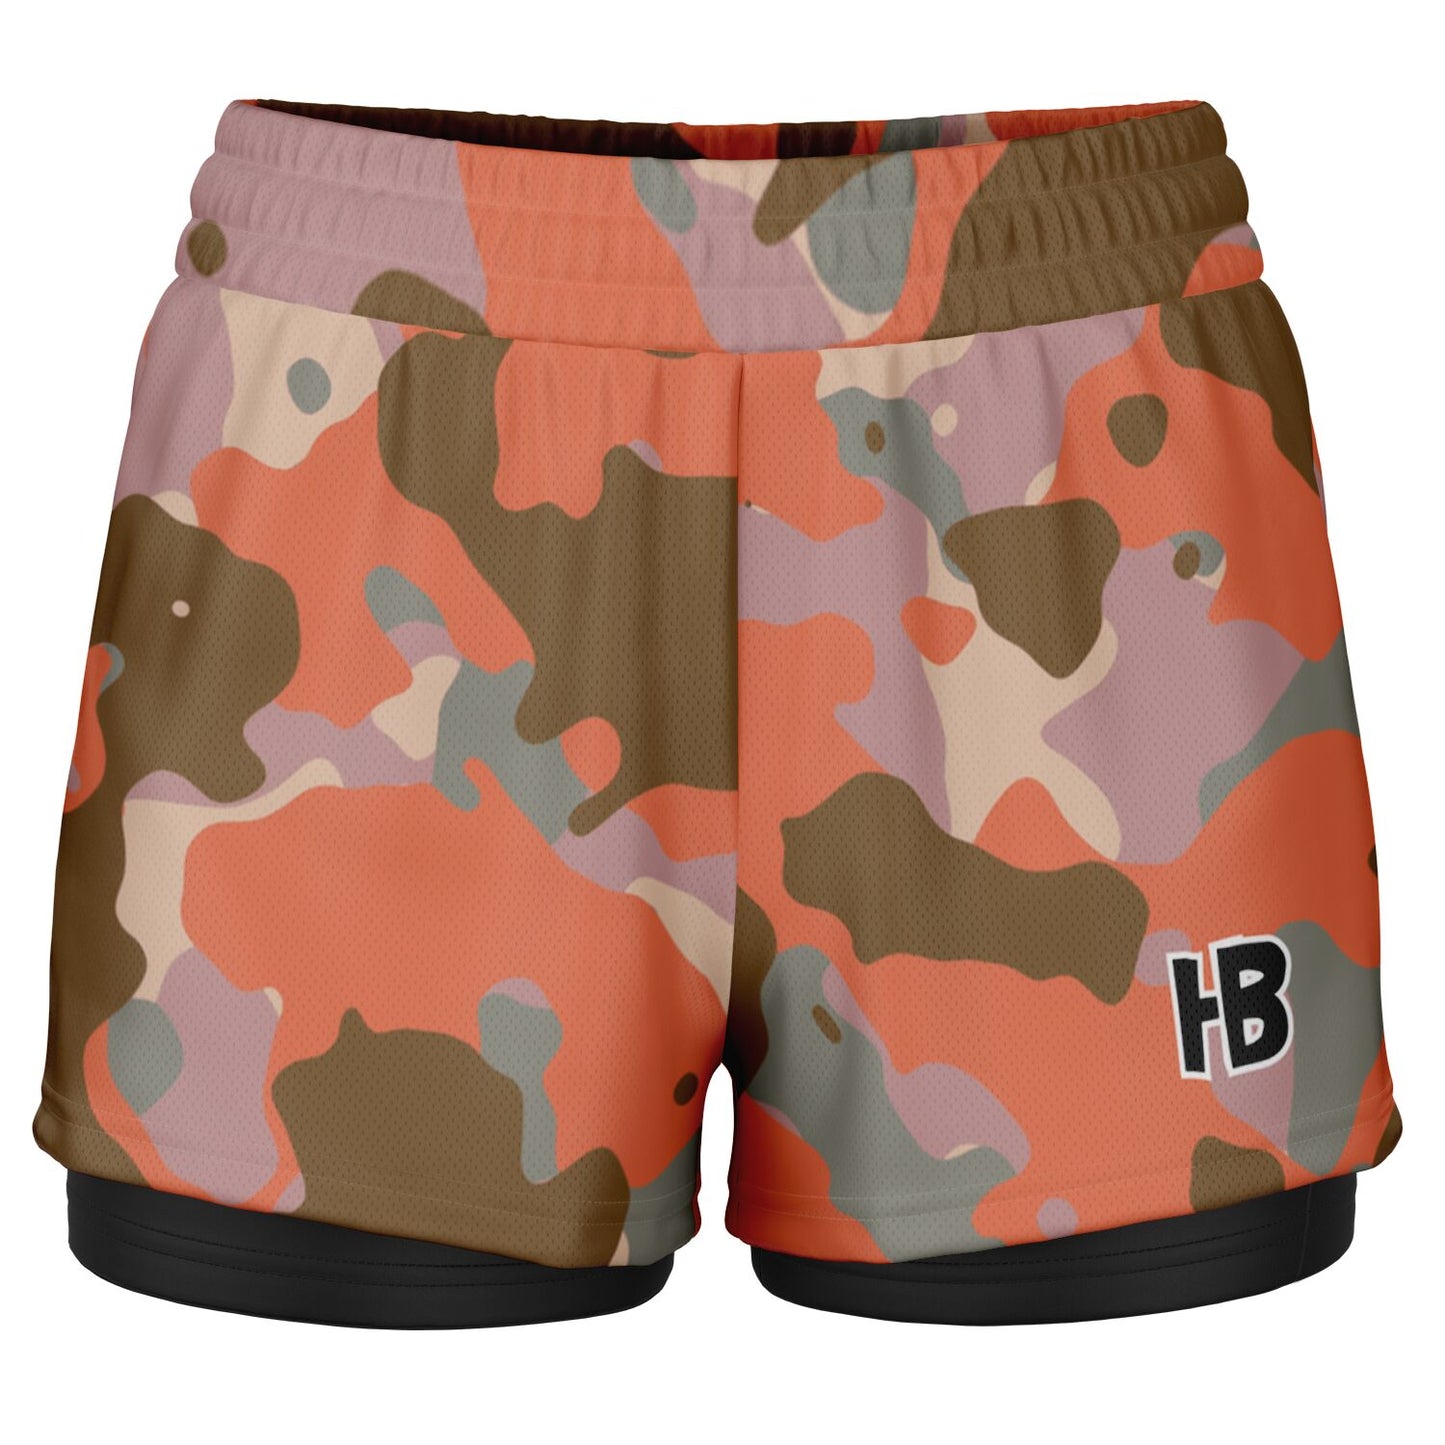 OrAnGe YoU cAnT cAmO mEn'S AnD wOmEN's 2 In 1 ShOrTs